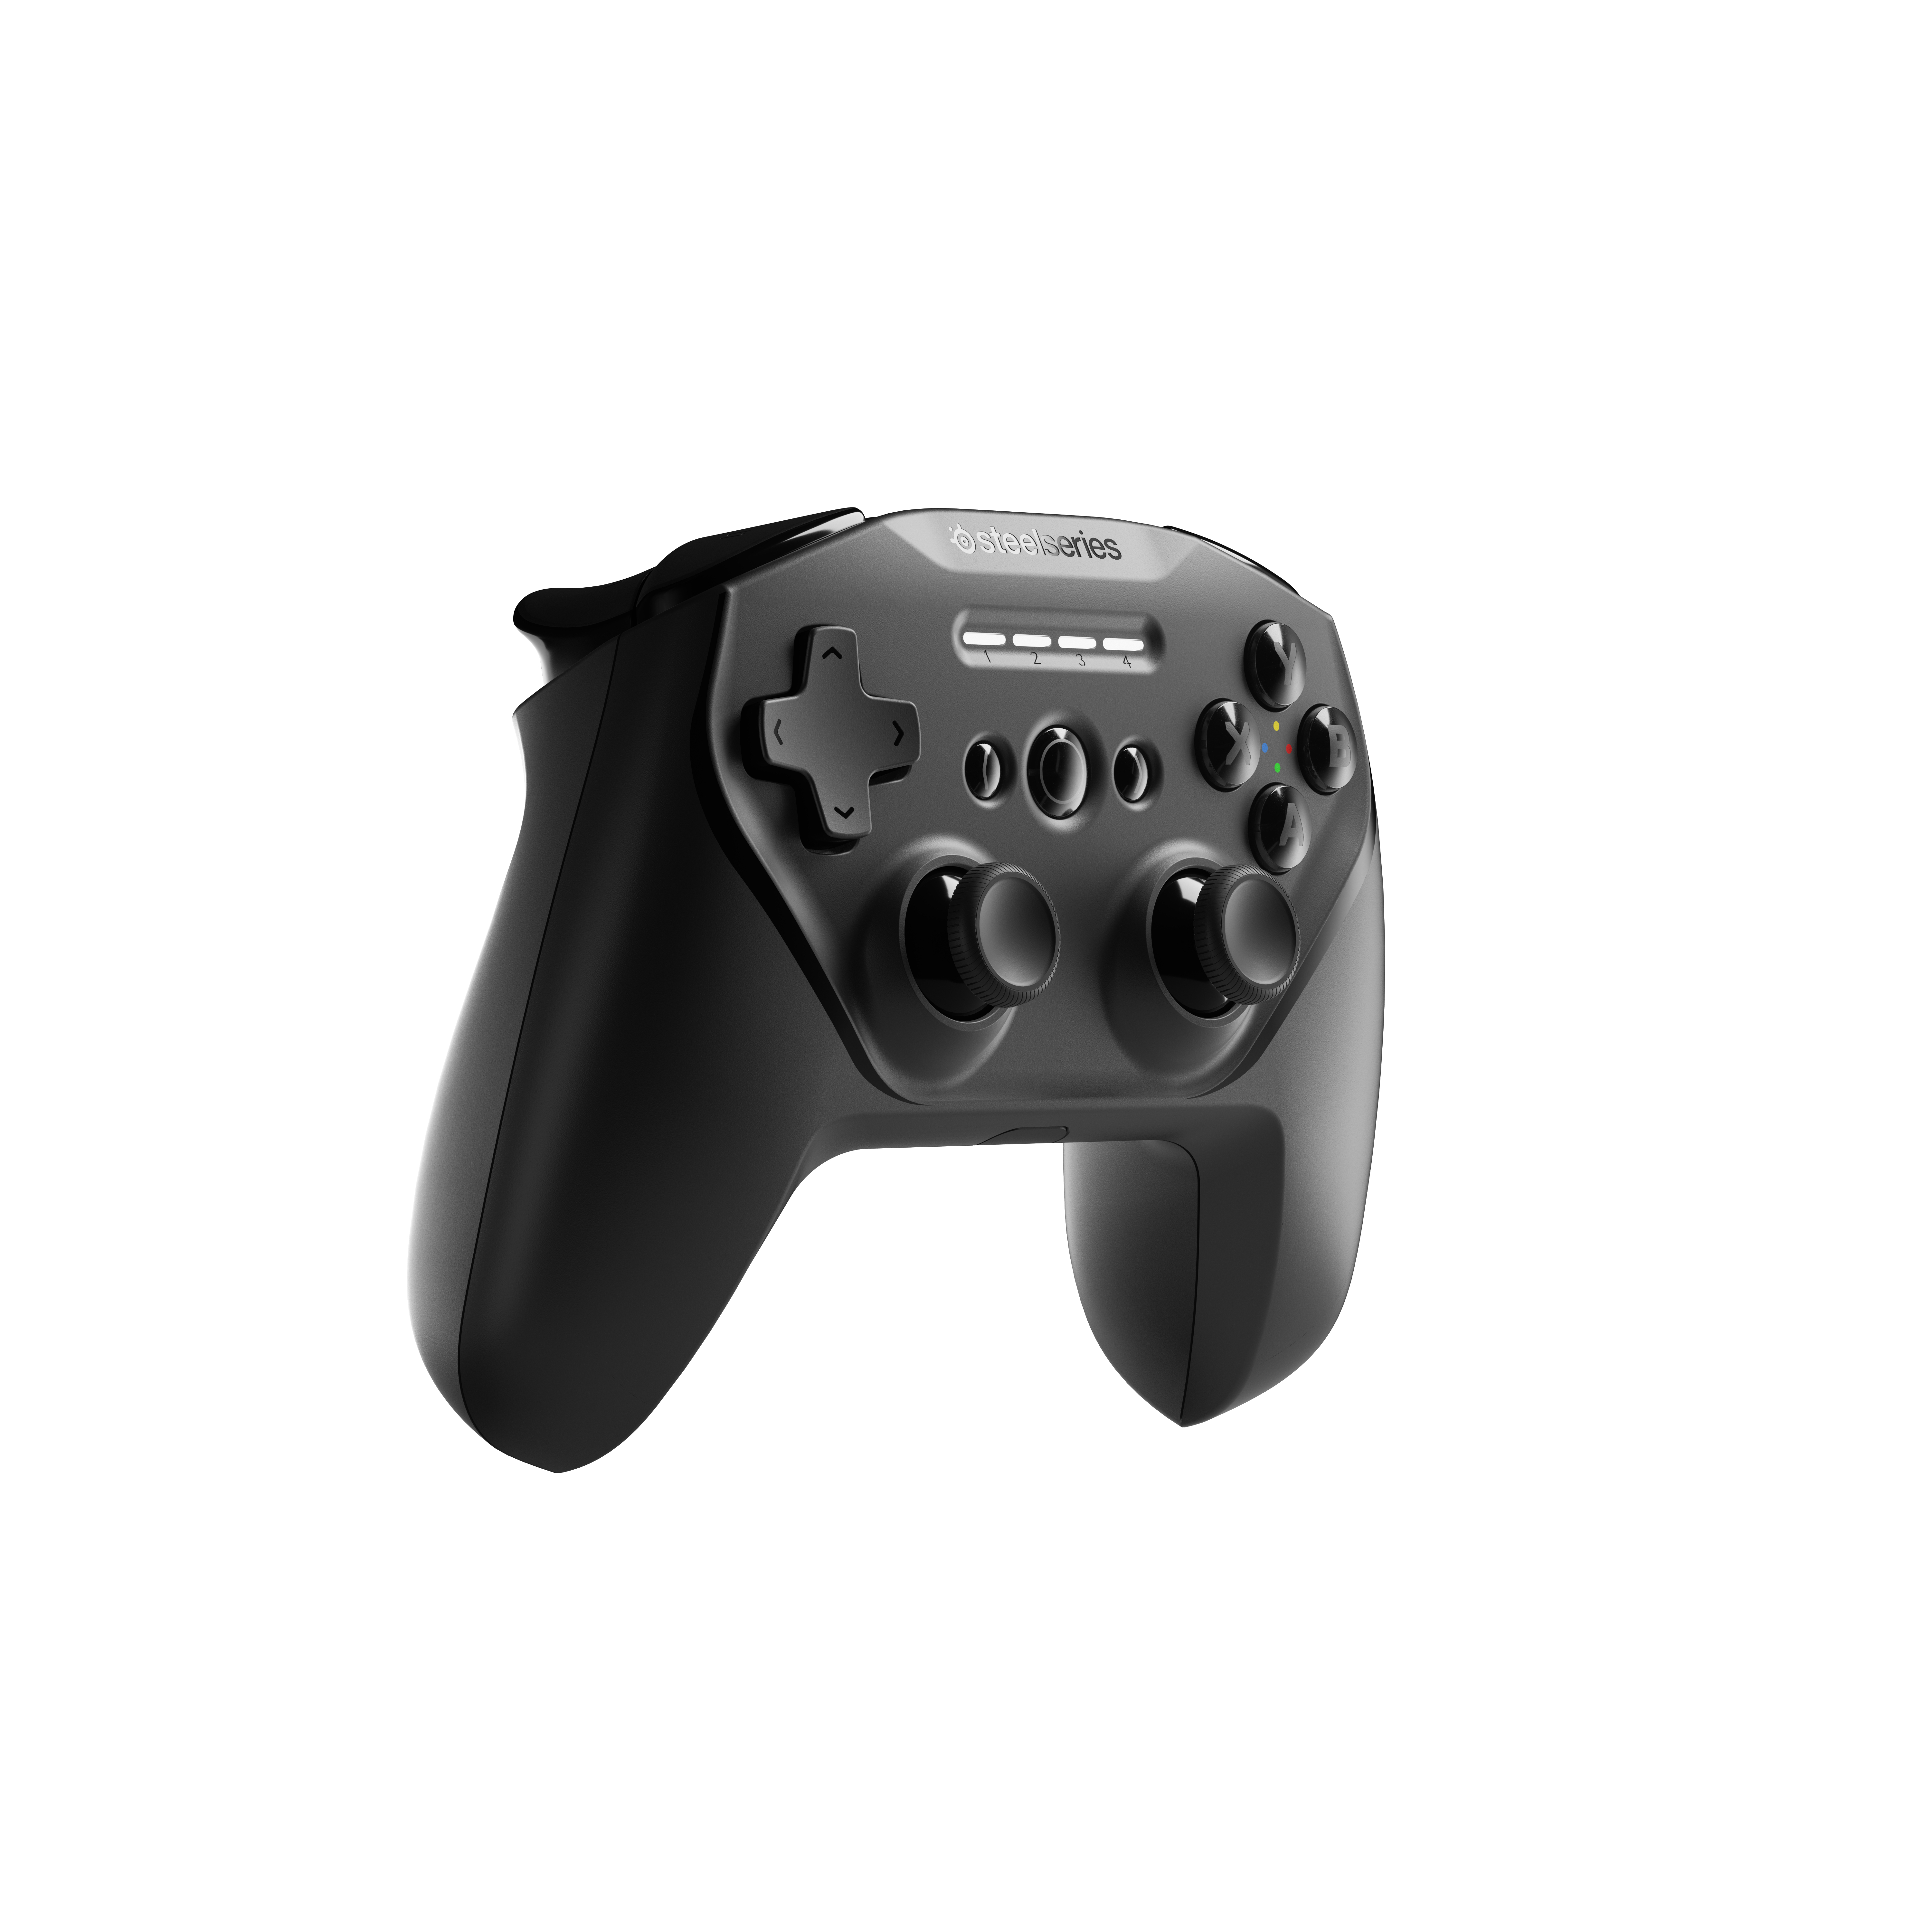 STEELSERIES STRATUS Other für PC, Controller Schwarz Android, DUO Gaming